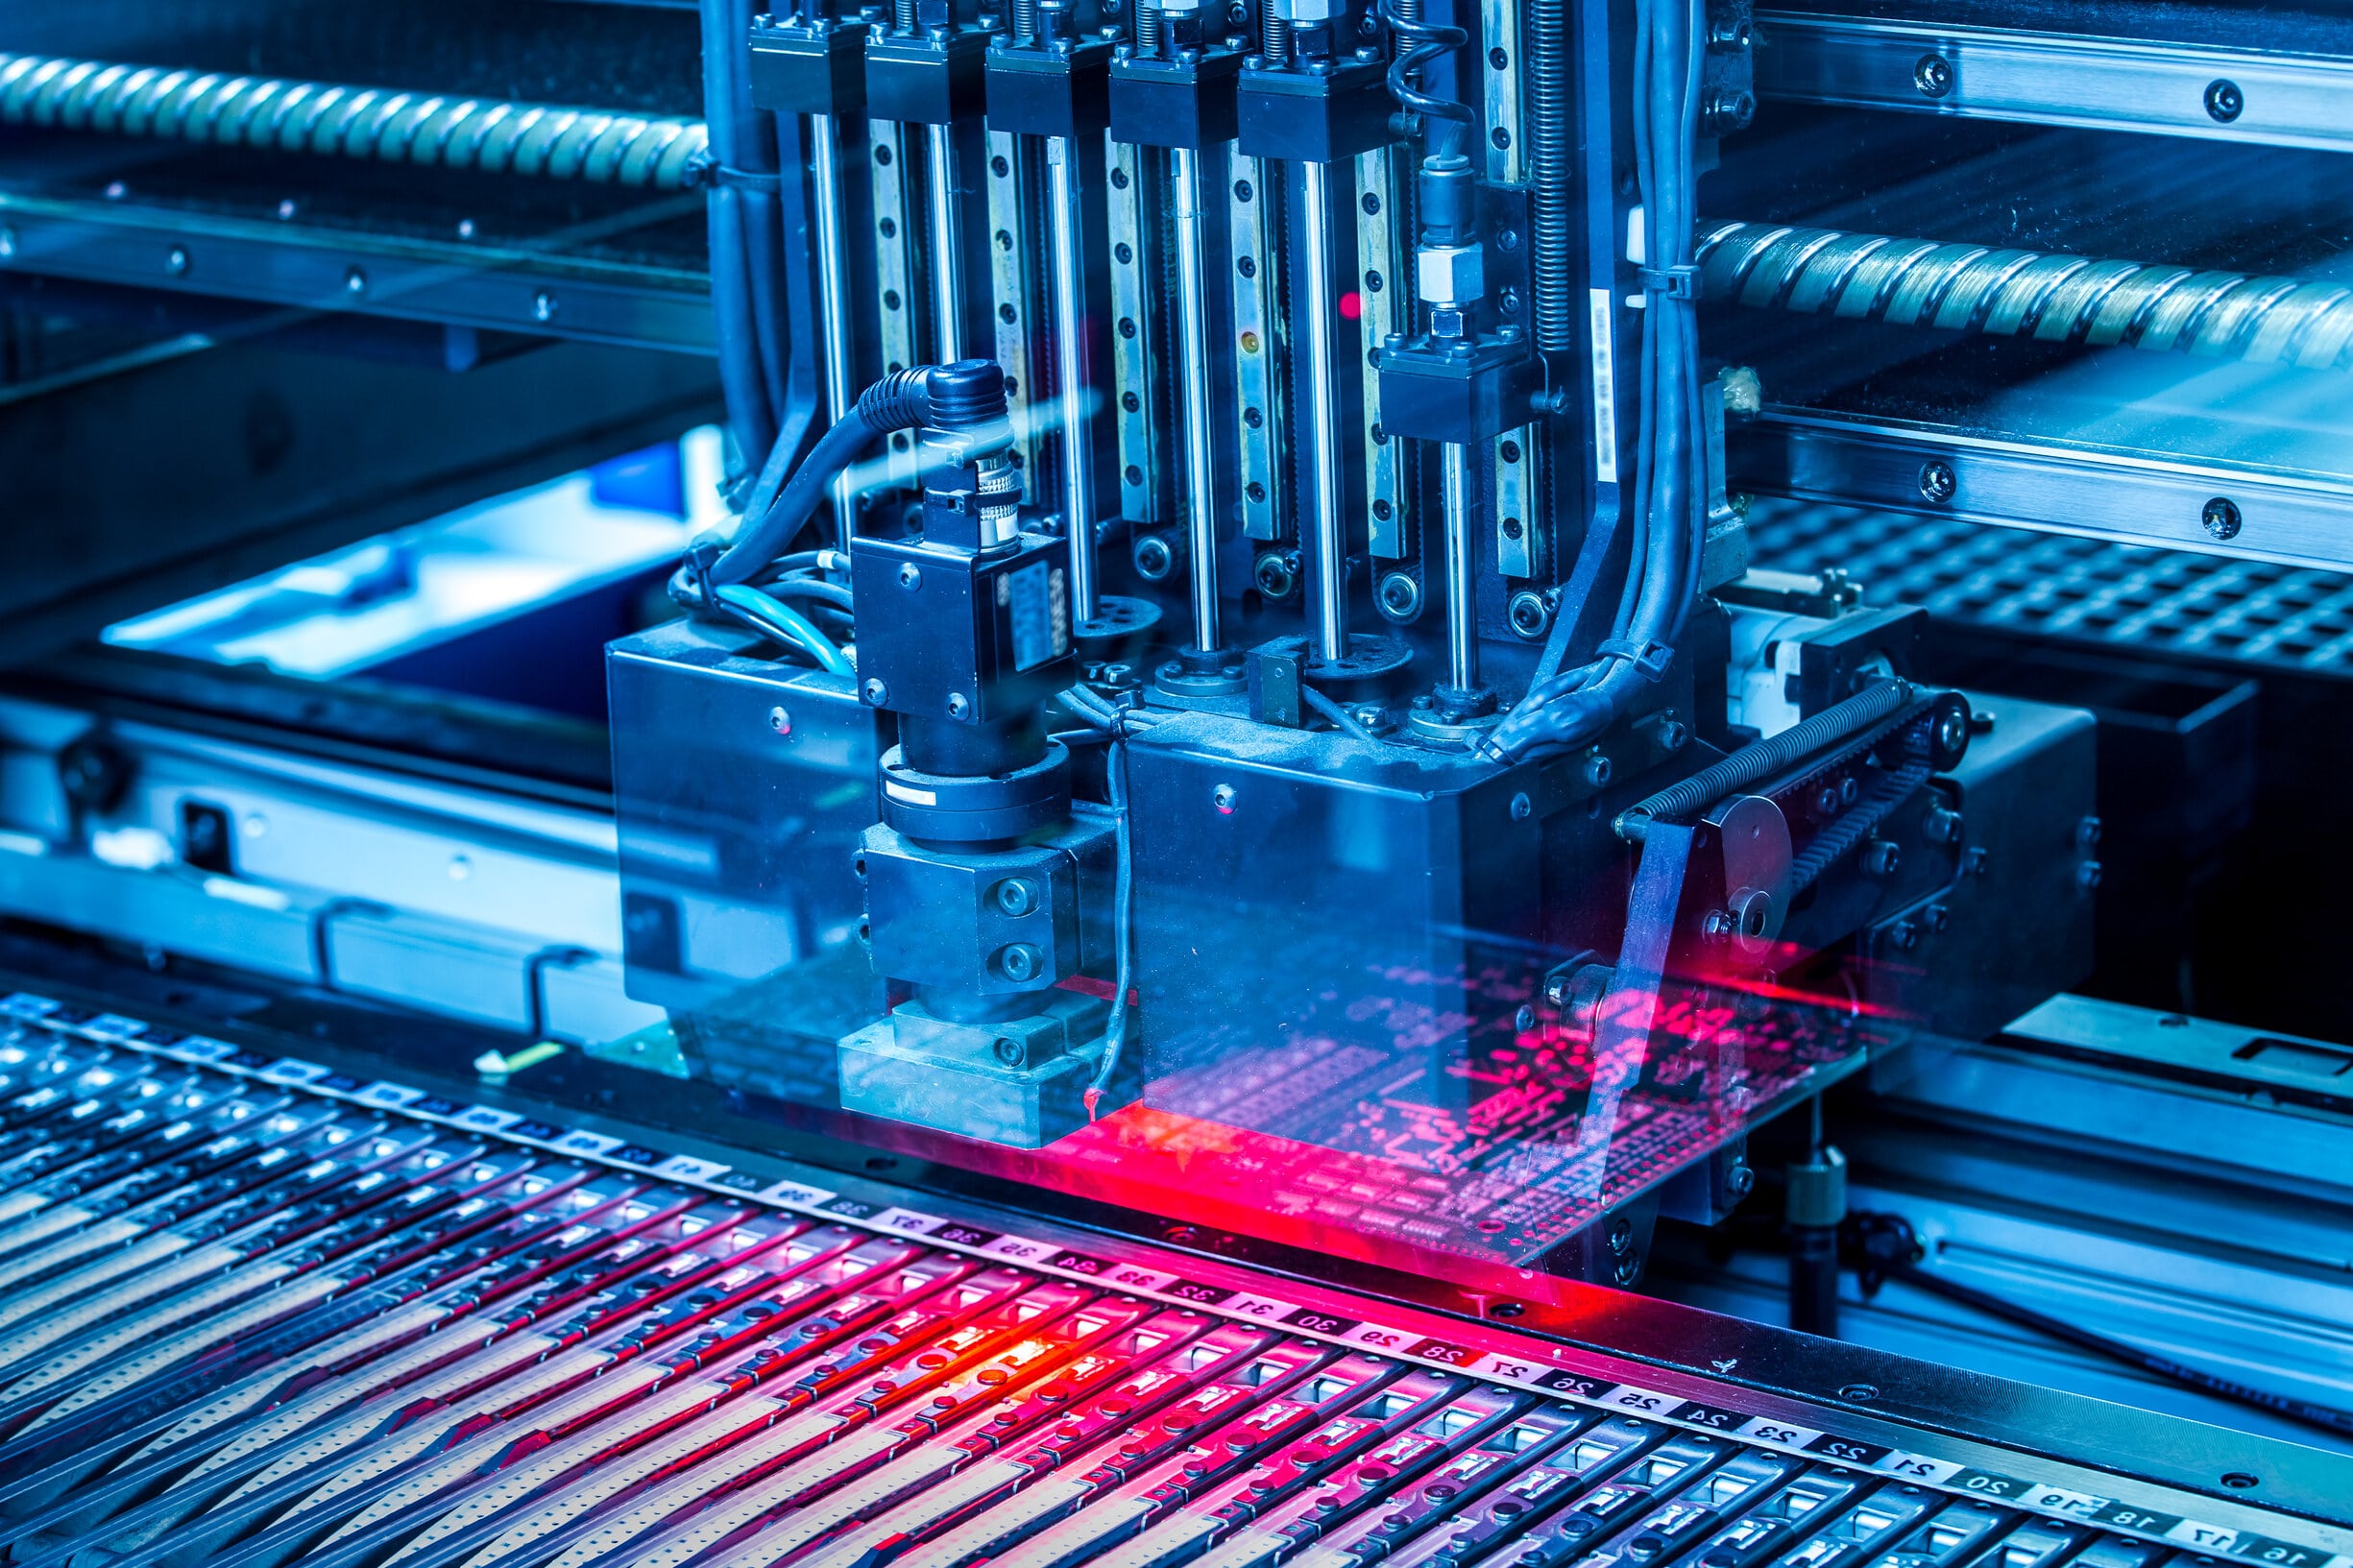 Electronics Manufacturing's Industry Trends of 2022